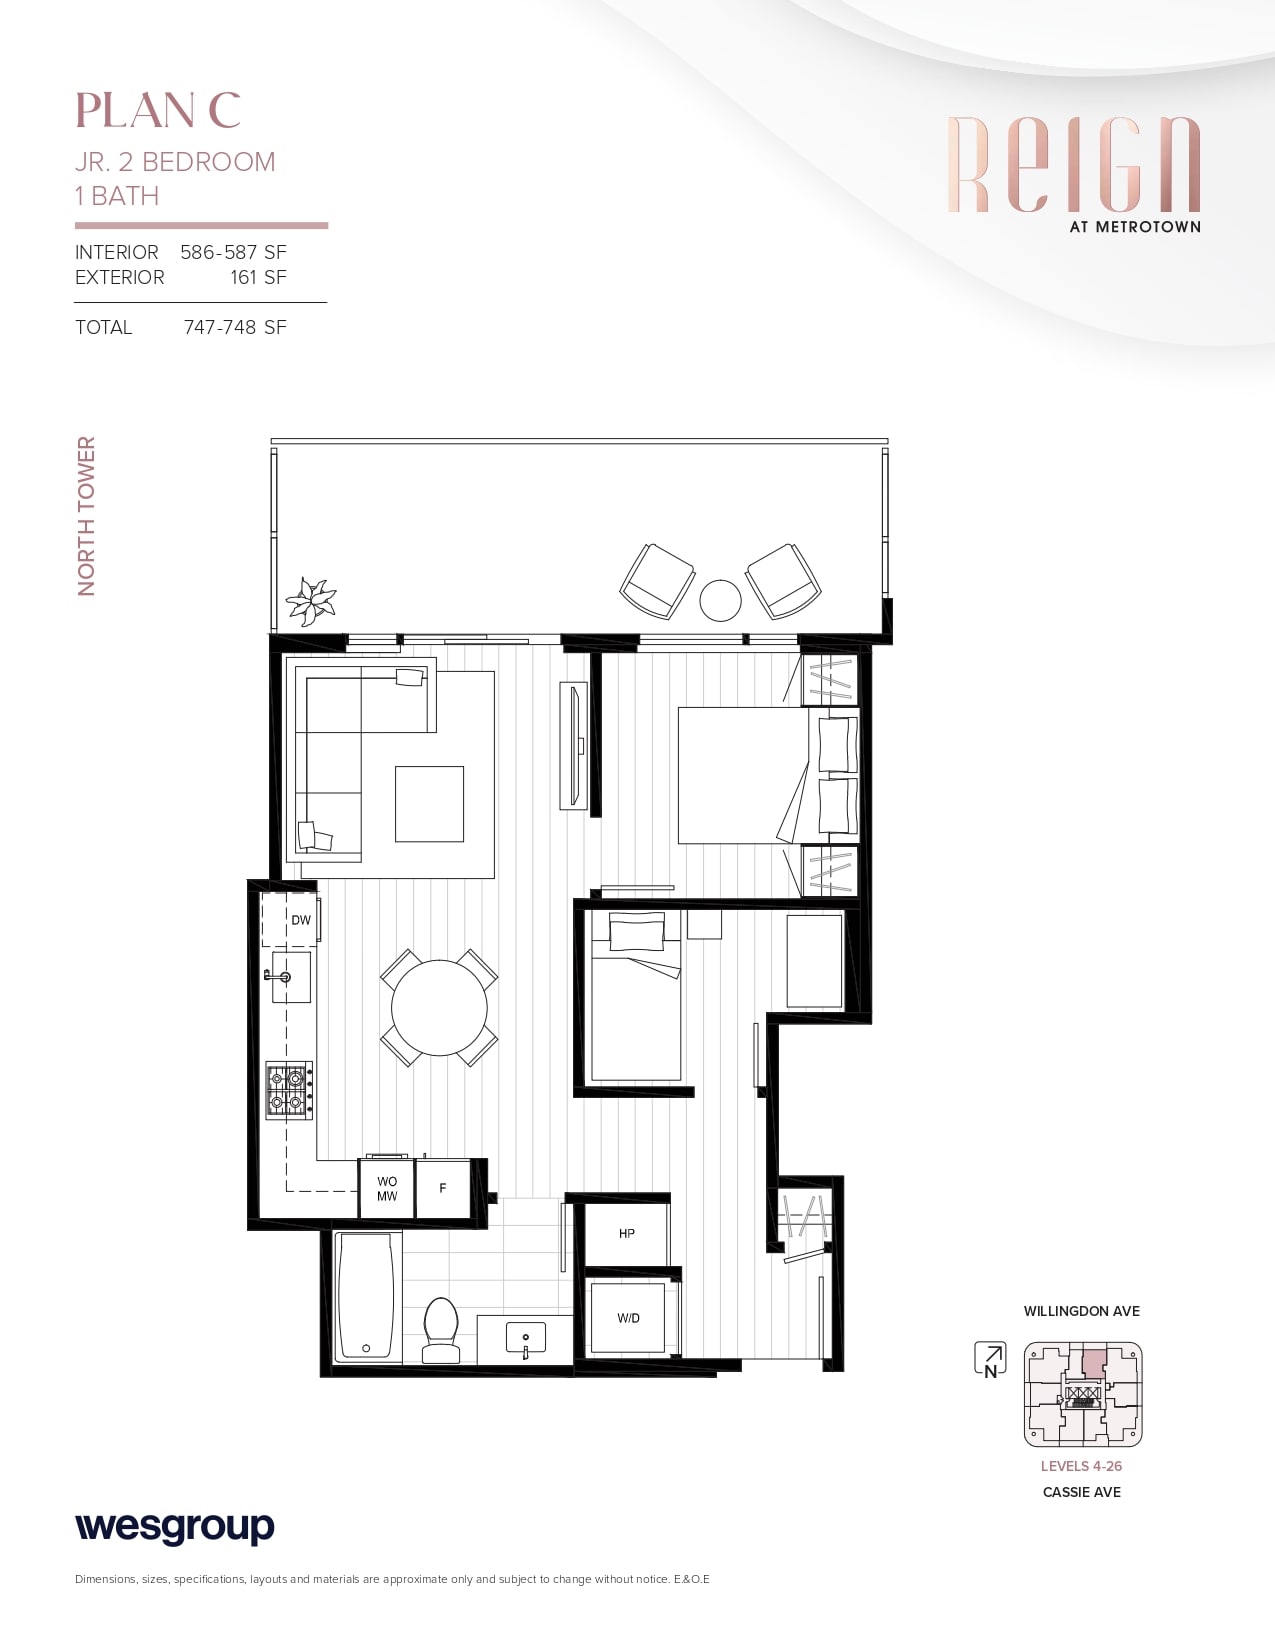 Reign_-_North_Tower_-_Typical_Floorplans_-_FINAL__page-0007-min.jpg